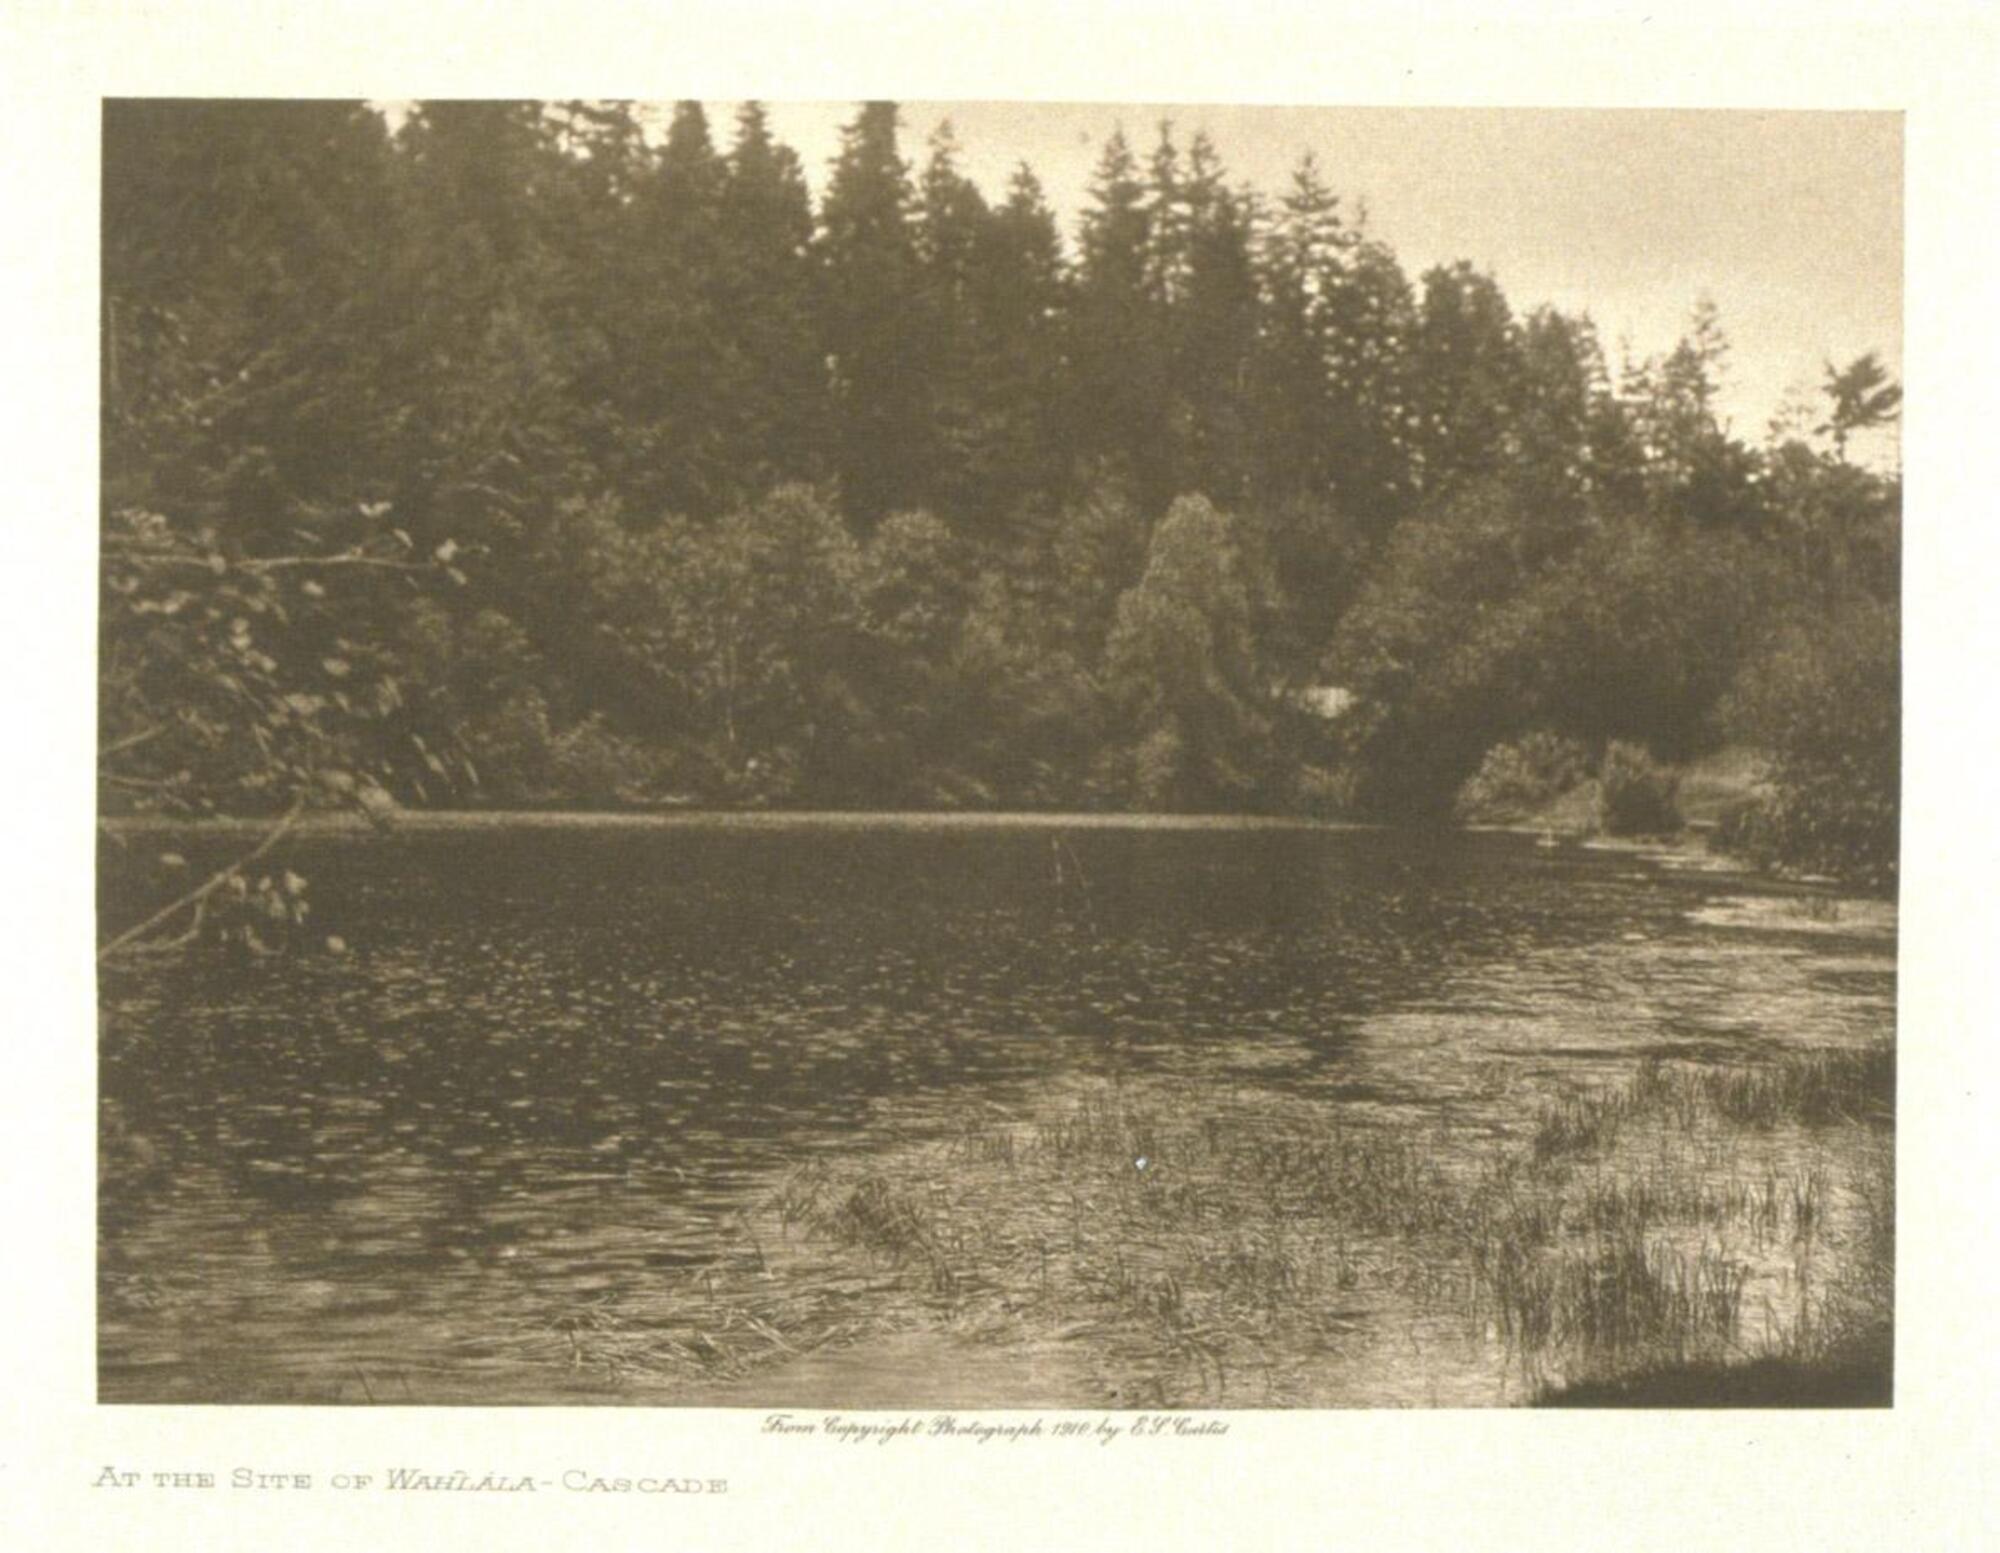 A landscape view of a river. In the foreground, reeds are visible growing in the water. On the far bank a forest of trees frame the horizon line.